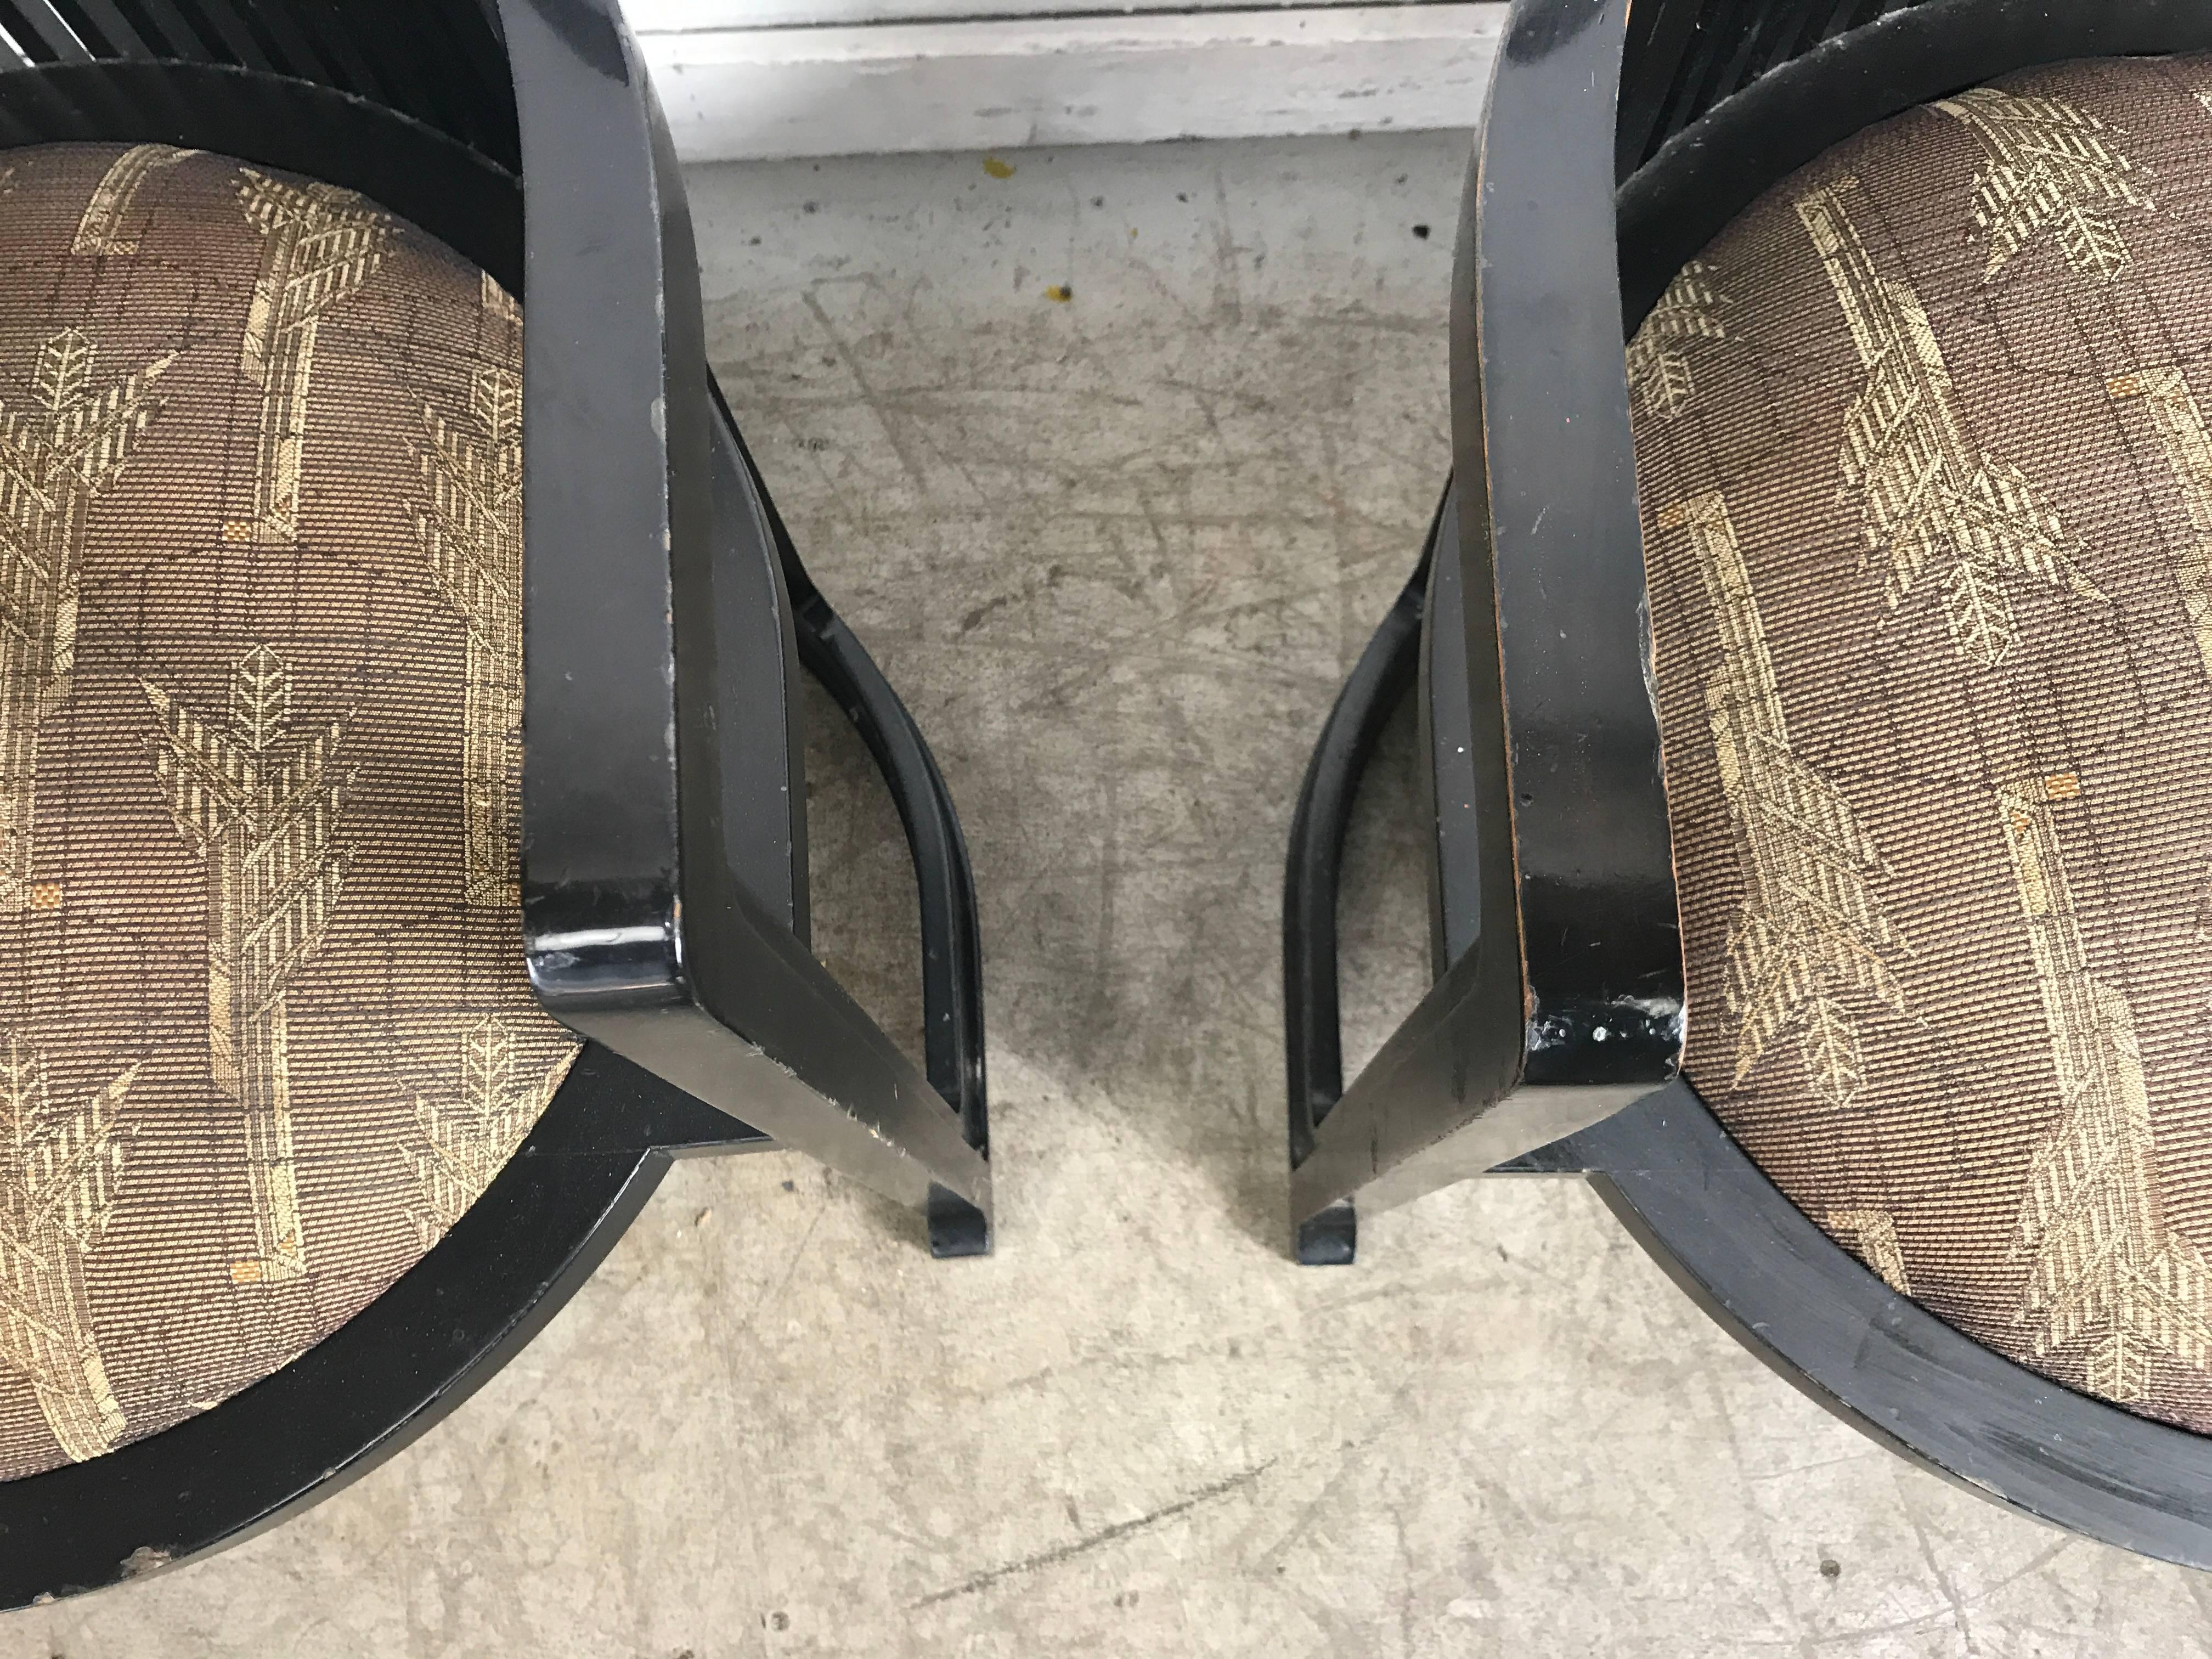 Pair of 606 Barrel Taliesin chairs Frank Lloyd Wright for Cassina... Retains original dark Lacquer finish as well as arts and crafts style upholstered seats. Cassina impressed mark.